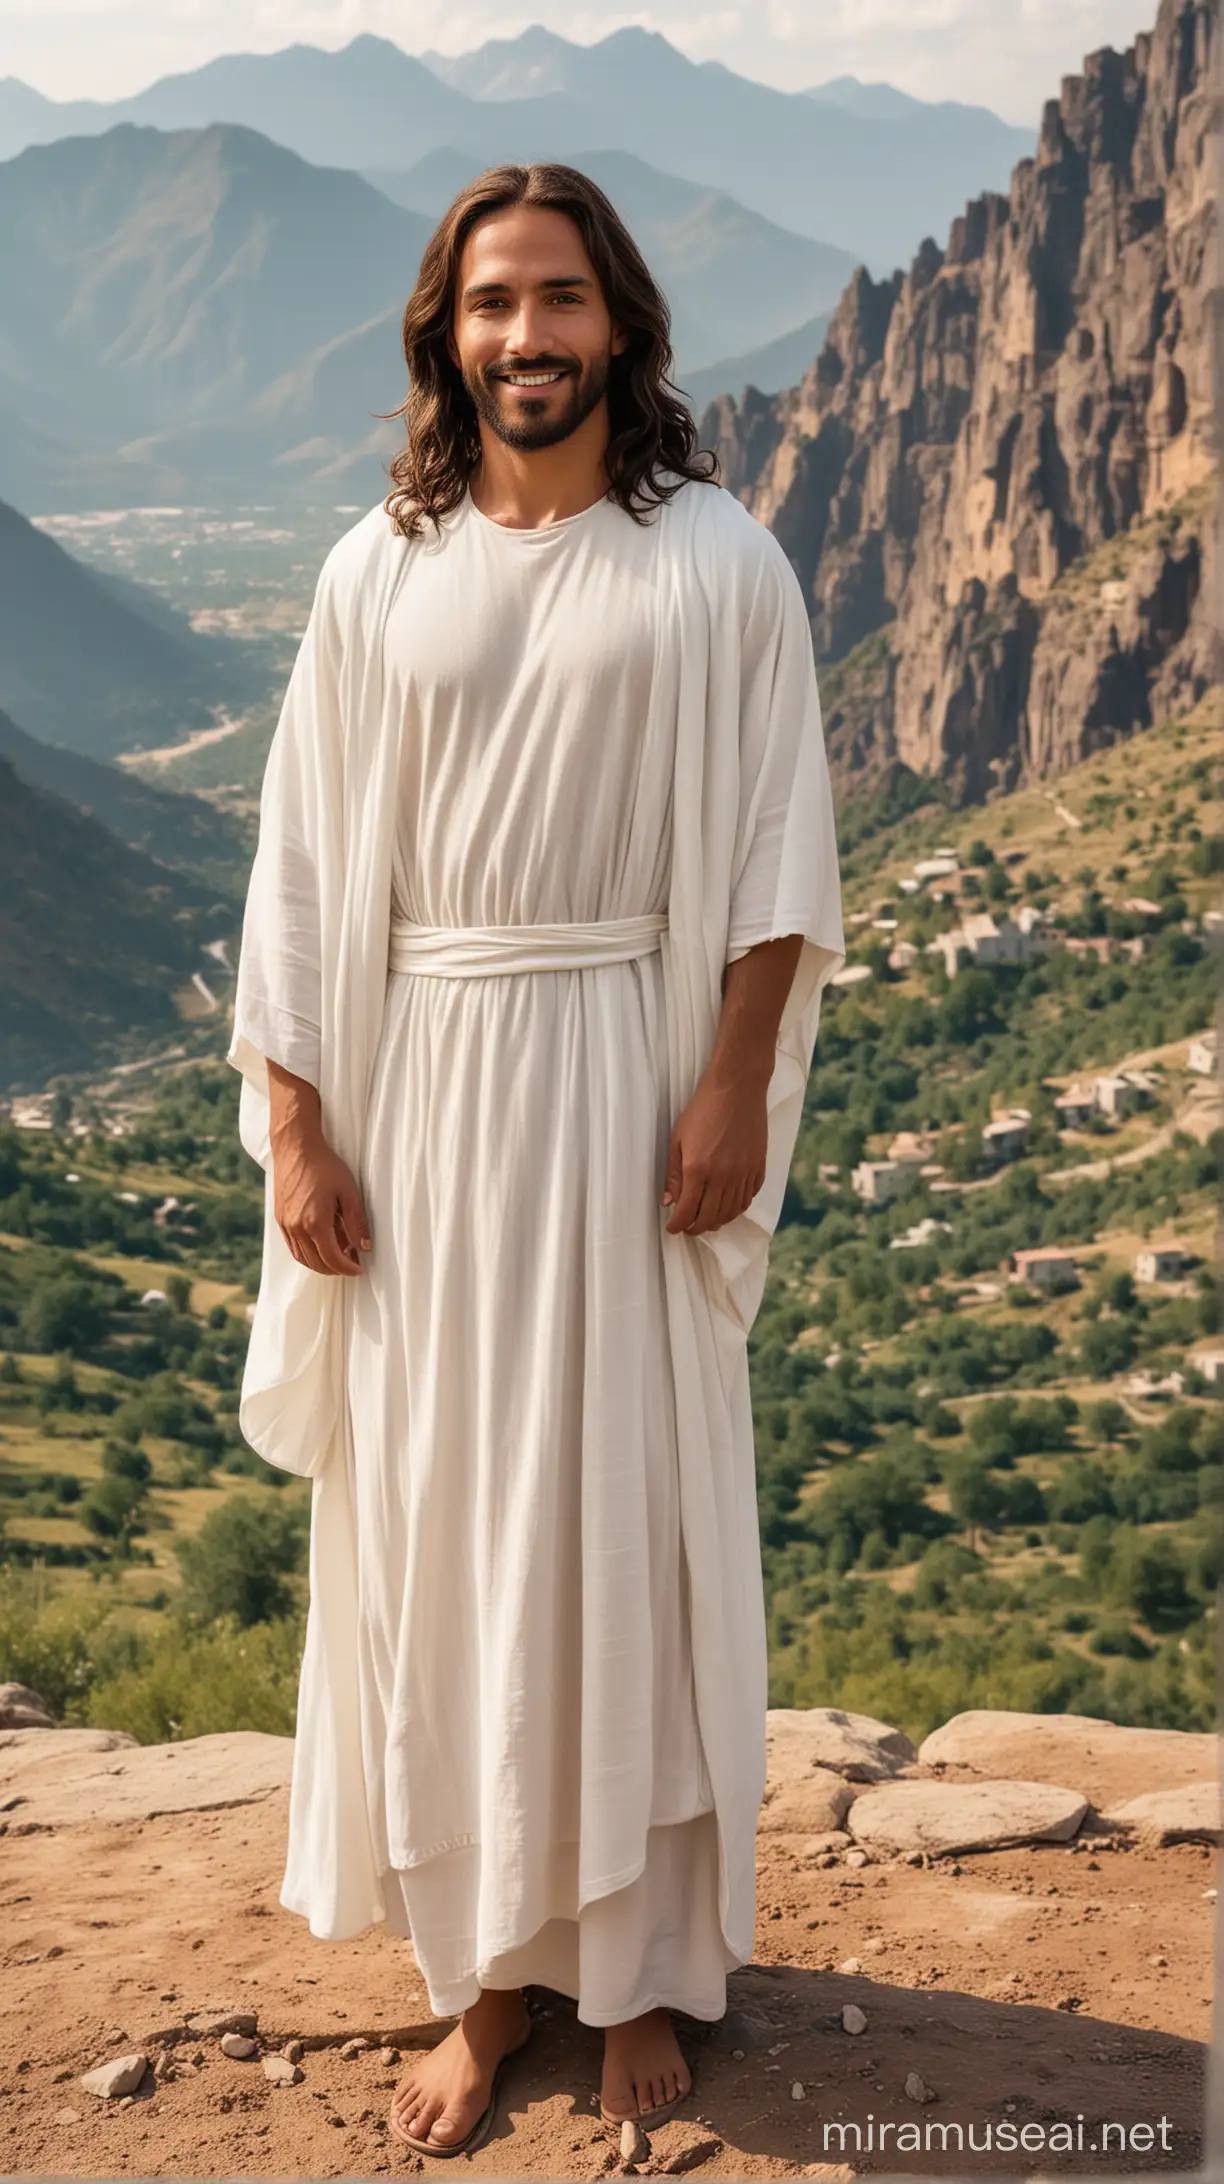 Jesus in white dress, slightly smiling, brown skin,  mountains in the background 